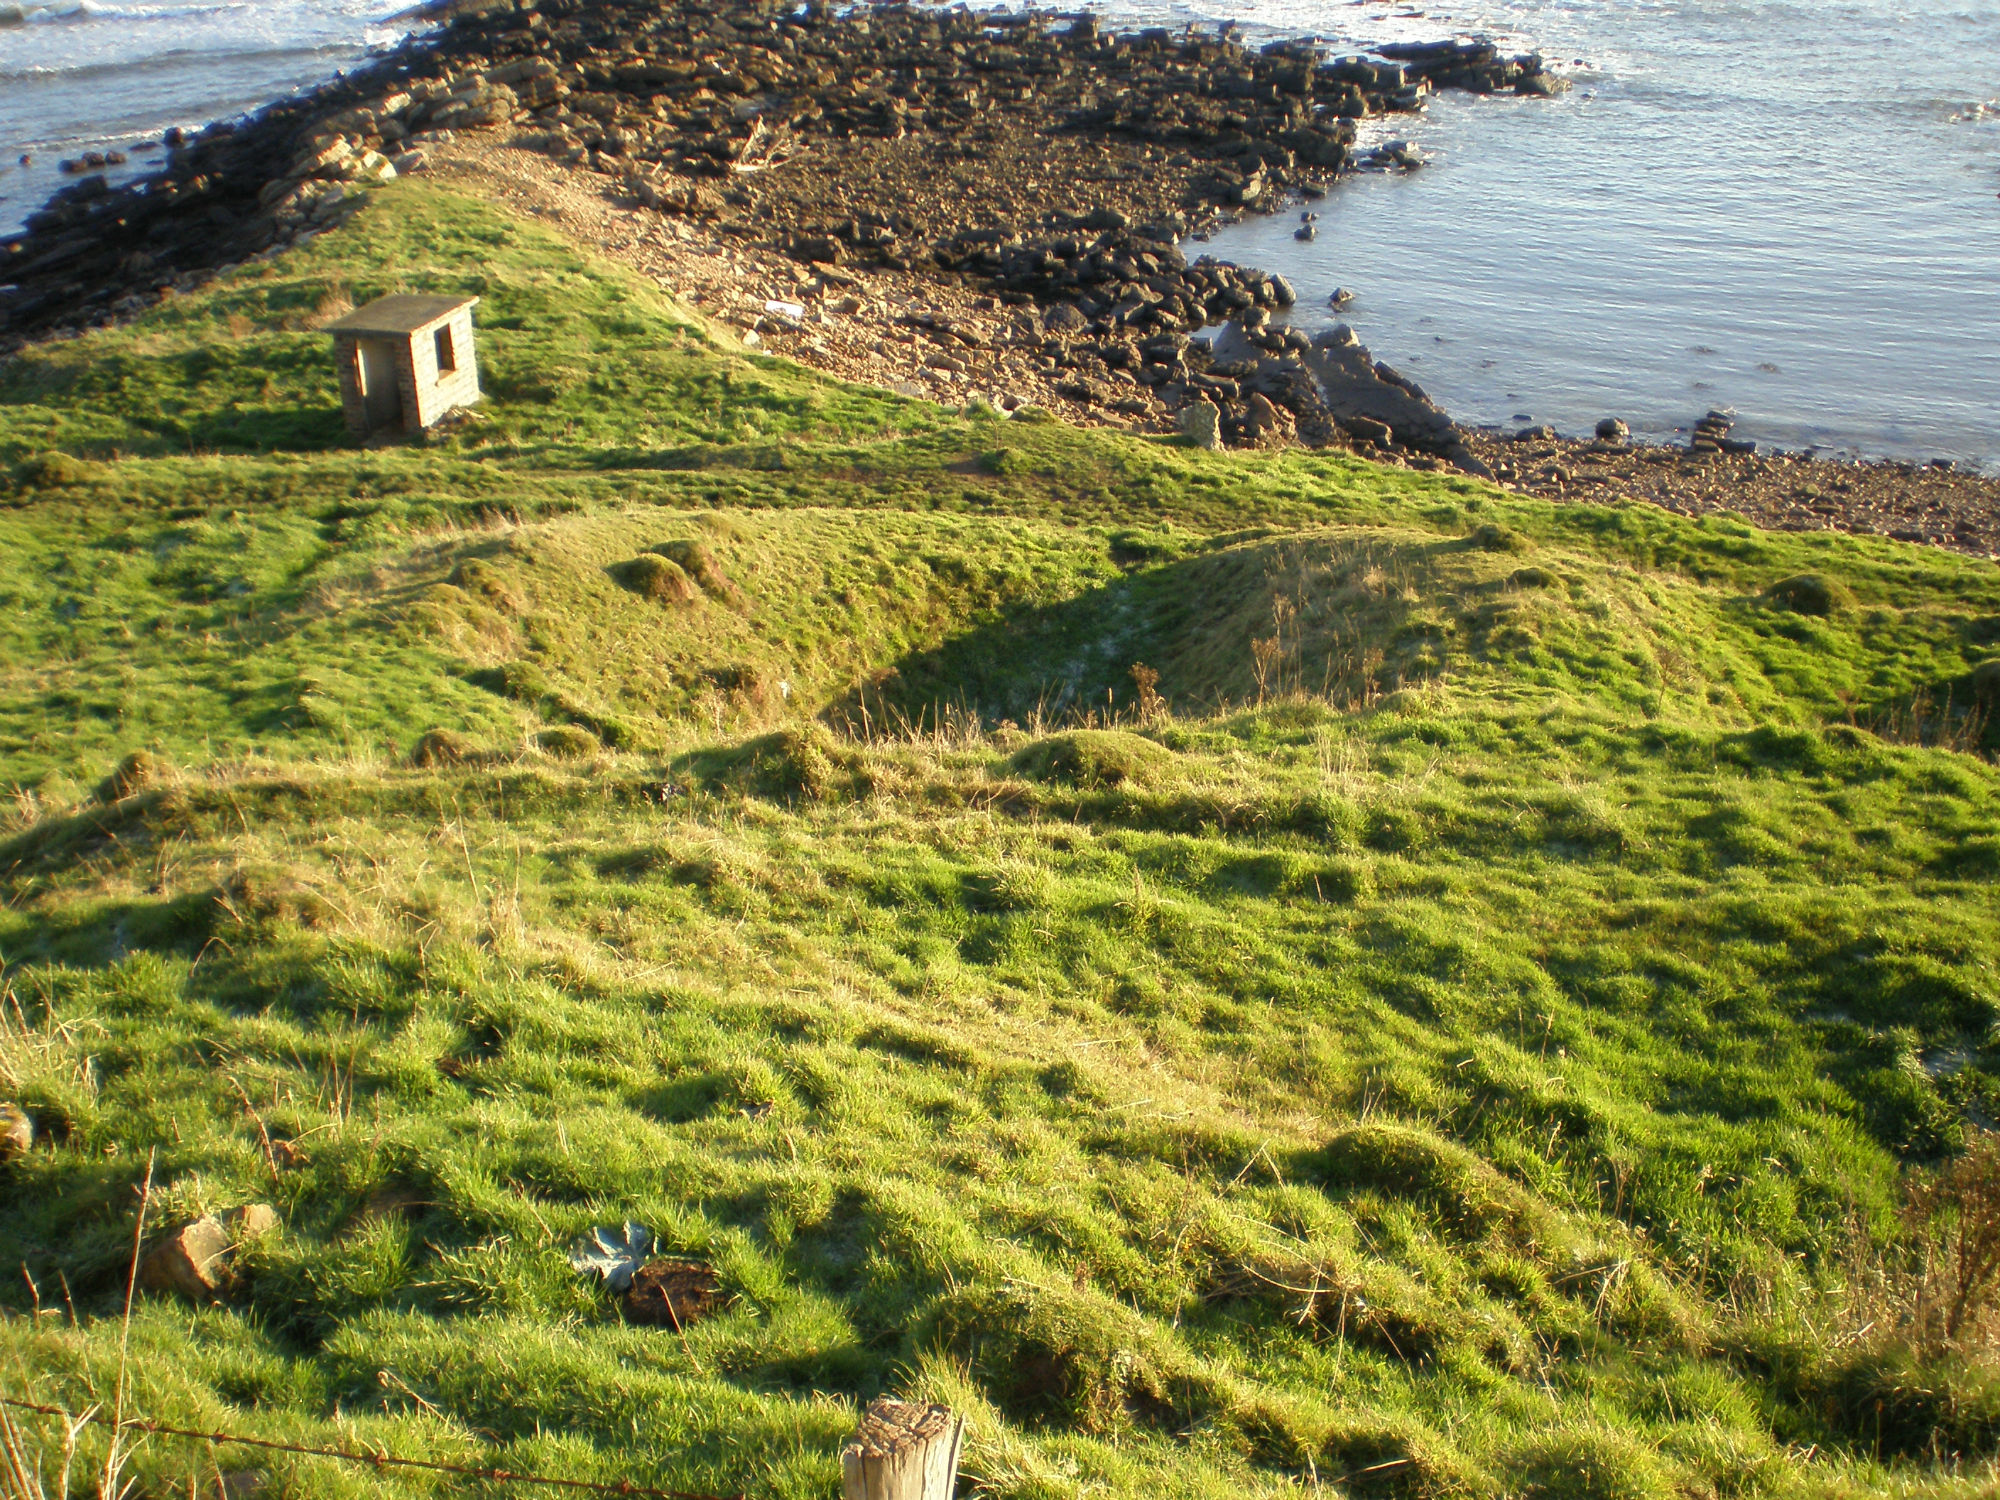 Earthworks [1484] in foreground, coastguard hut in ackground, looking SE